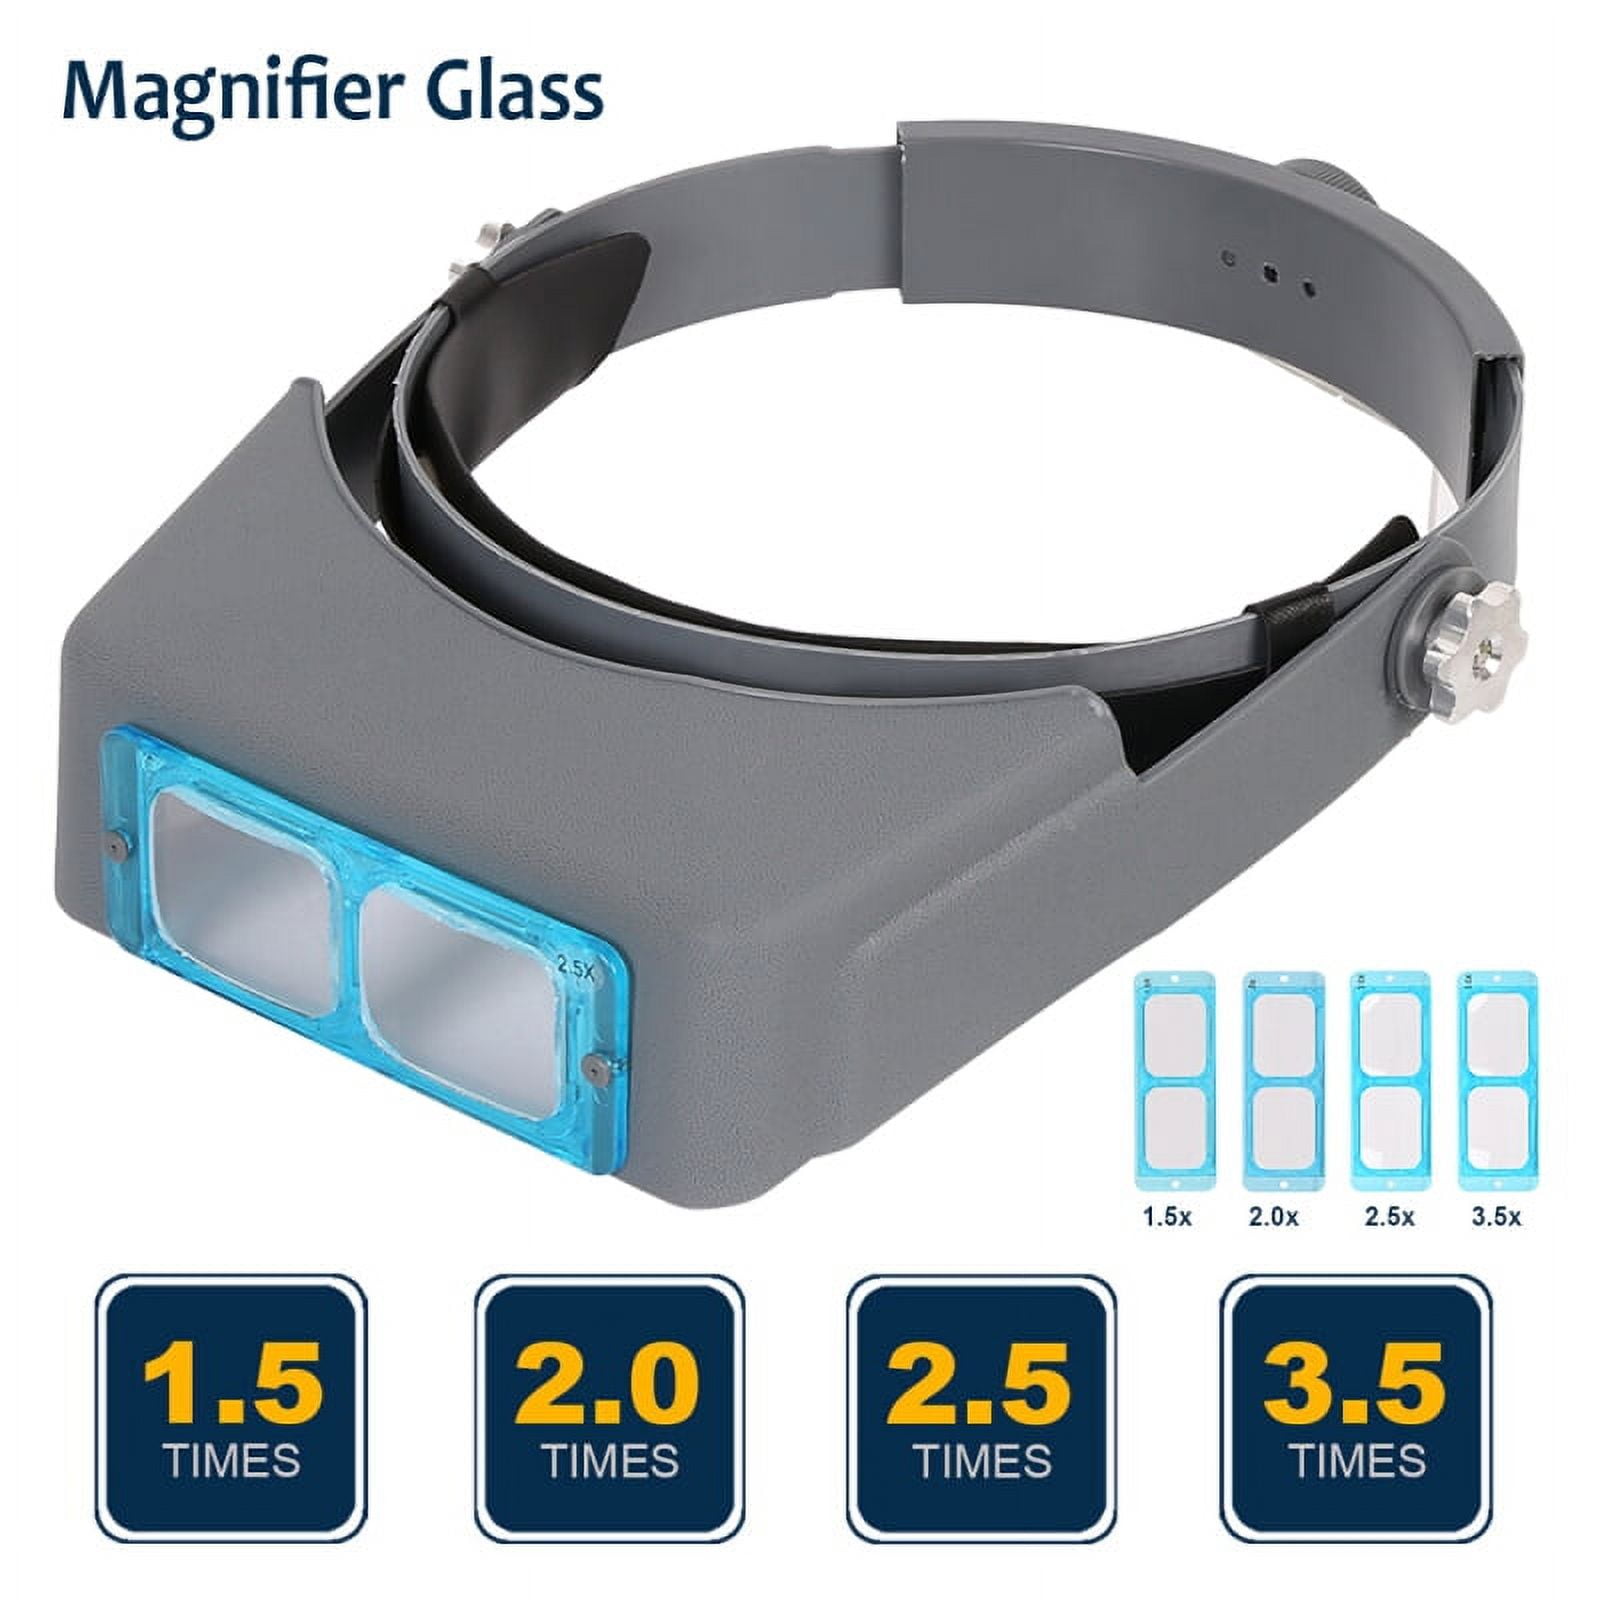 NZQXJXZ Headband Magnifier Glasses LED Magnifying Loupe Head Mount Magnifier Hands—Free Bracket and Headband Are Interchangeable 5 Replaceable Lenses